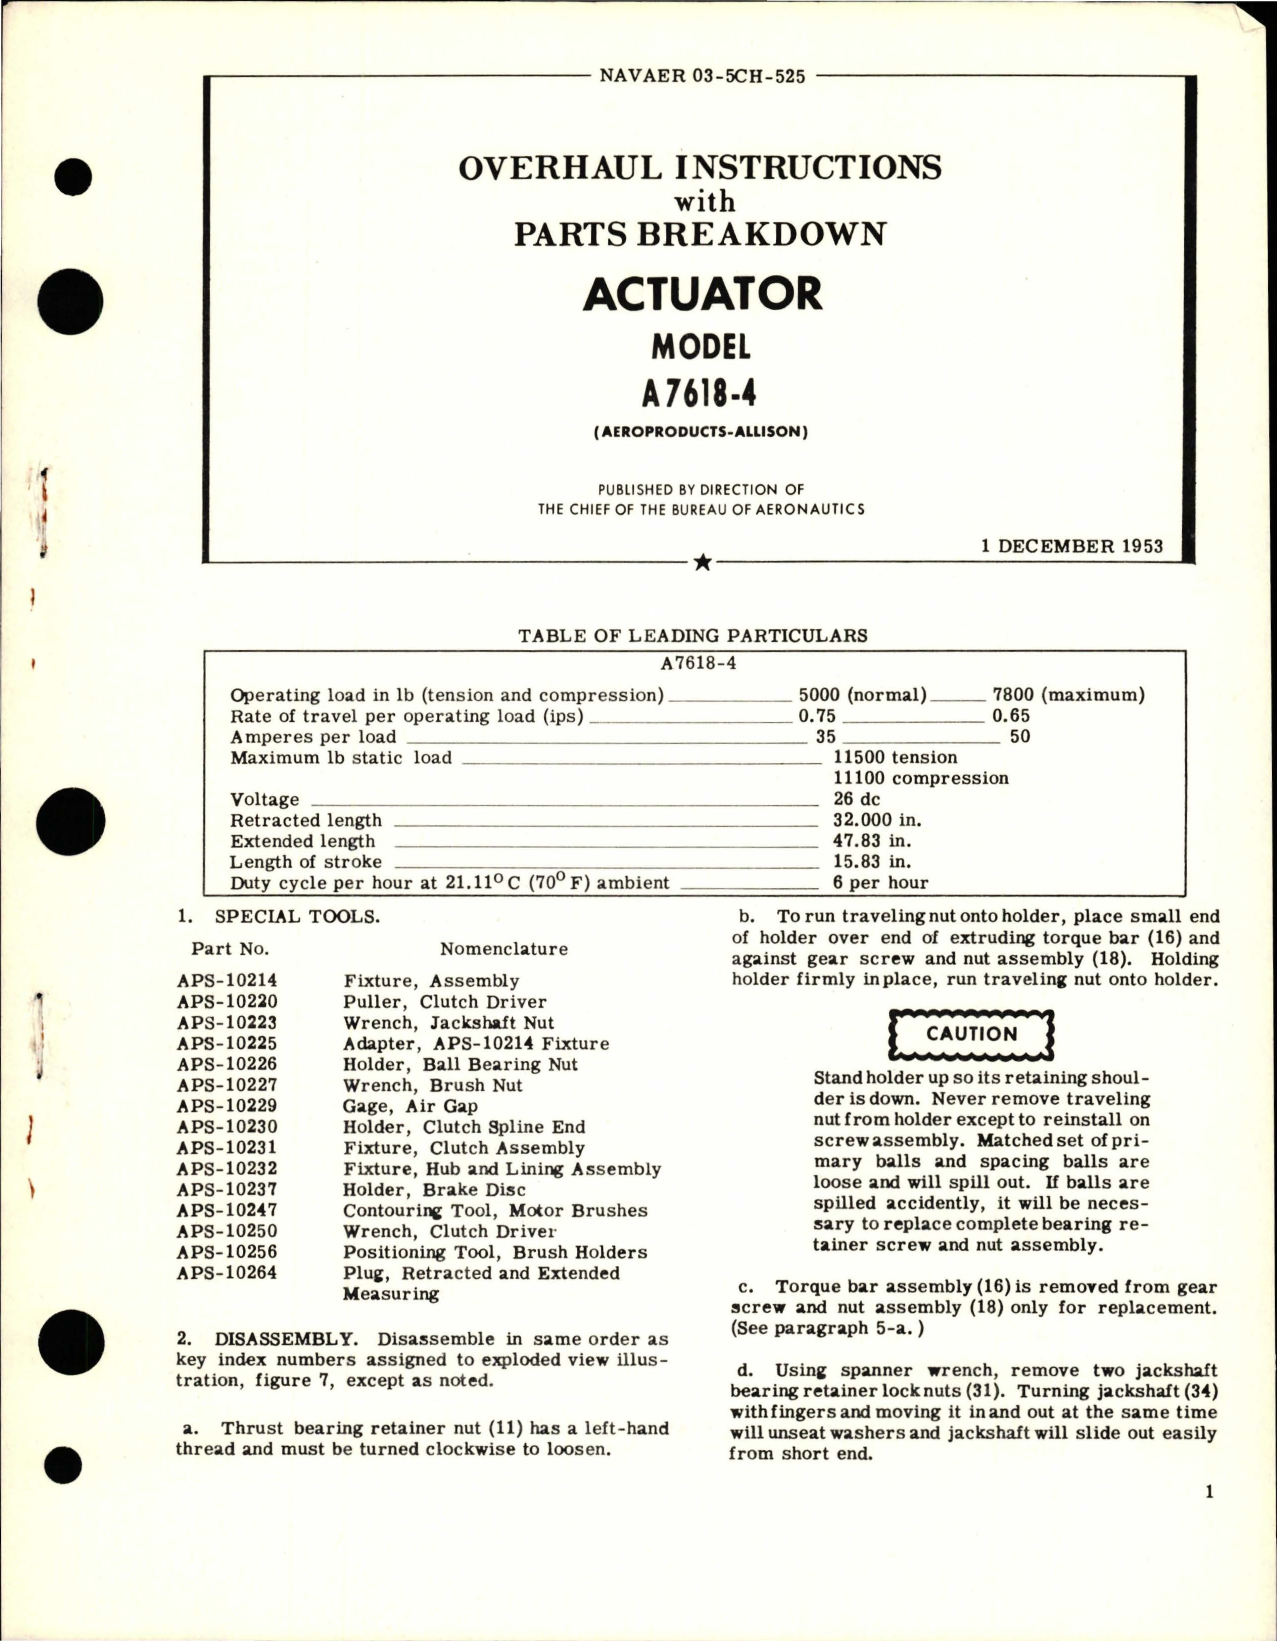 Sample page 1 from AirCorps Library document: Overhaul Instructions with Parts Breakdown for Actuator - Model A7618-4